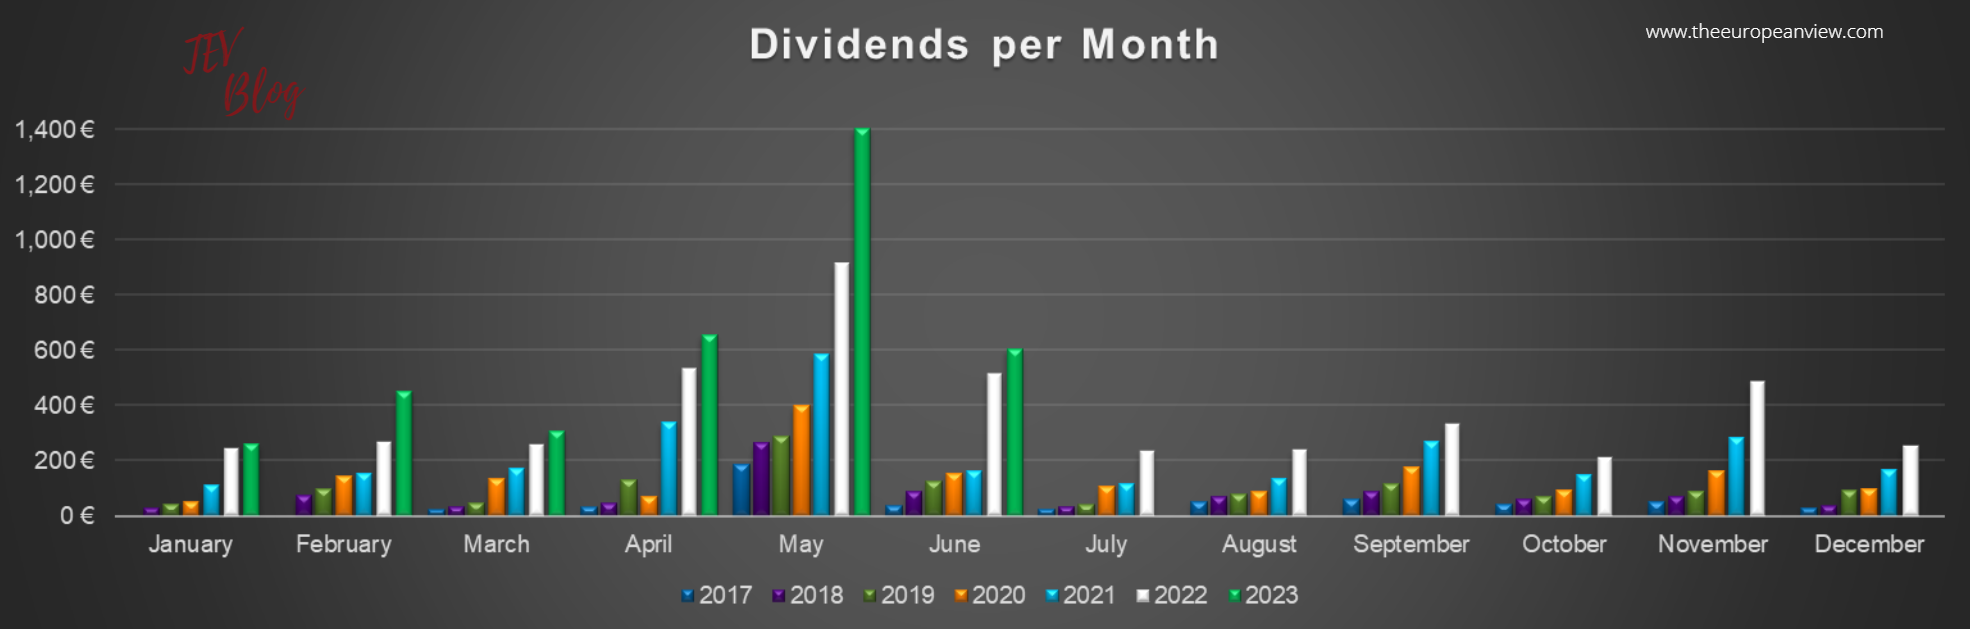 TEV Blog Dividend Monthly Income Report: dividends per month are coming in with a beautiful vital green in June